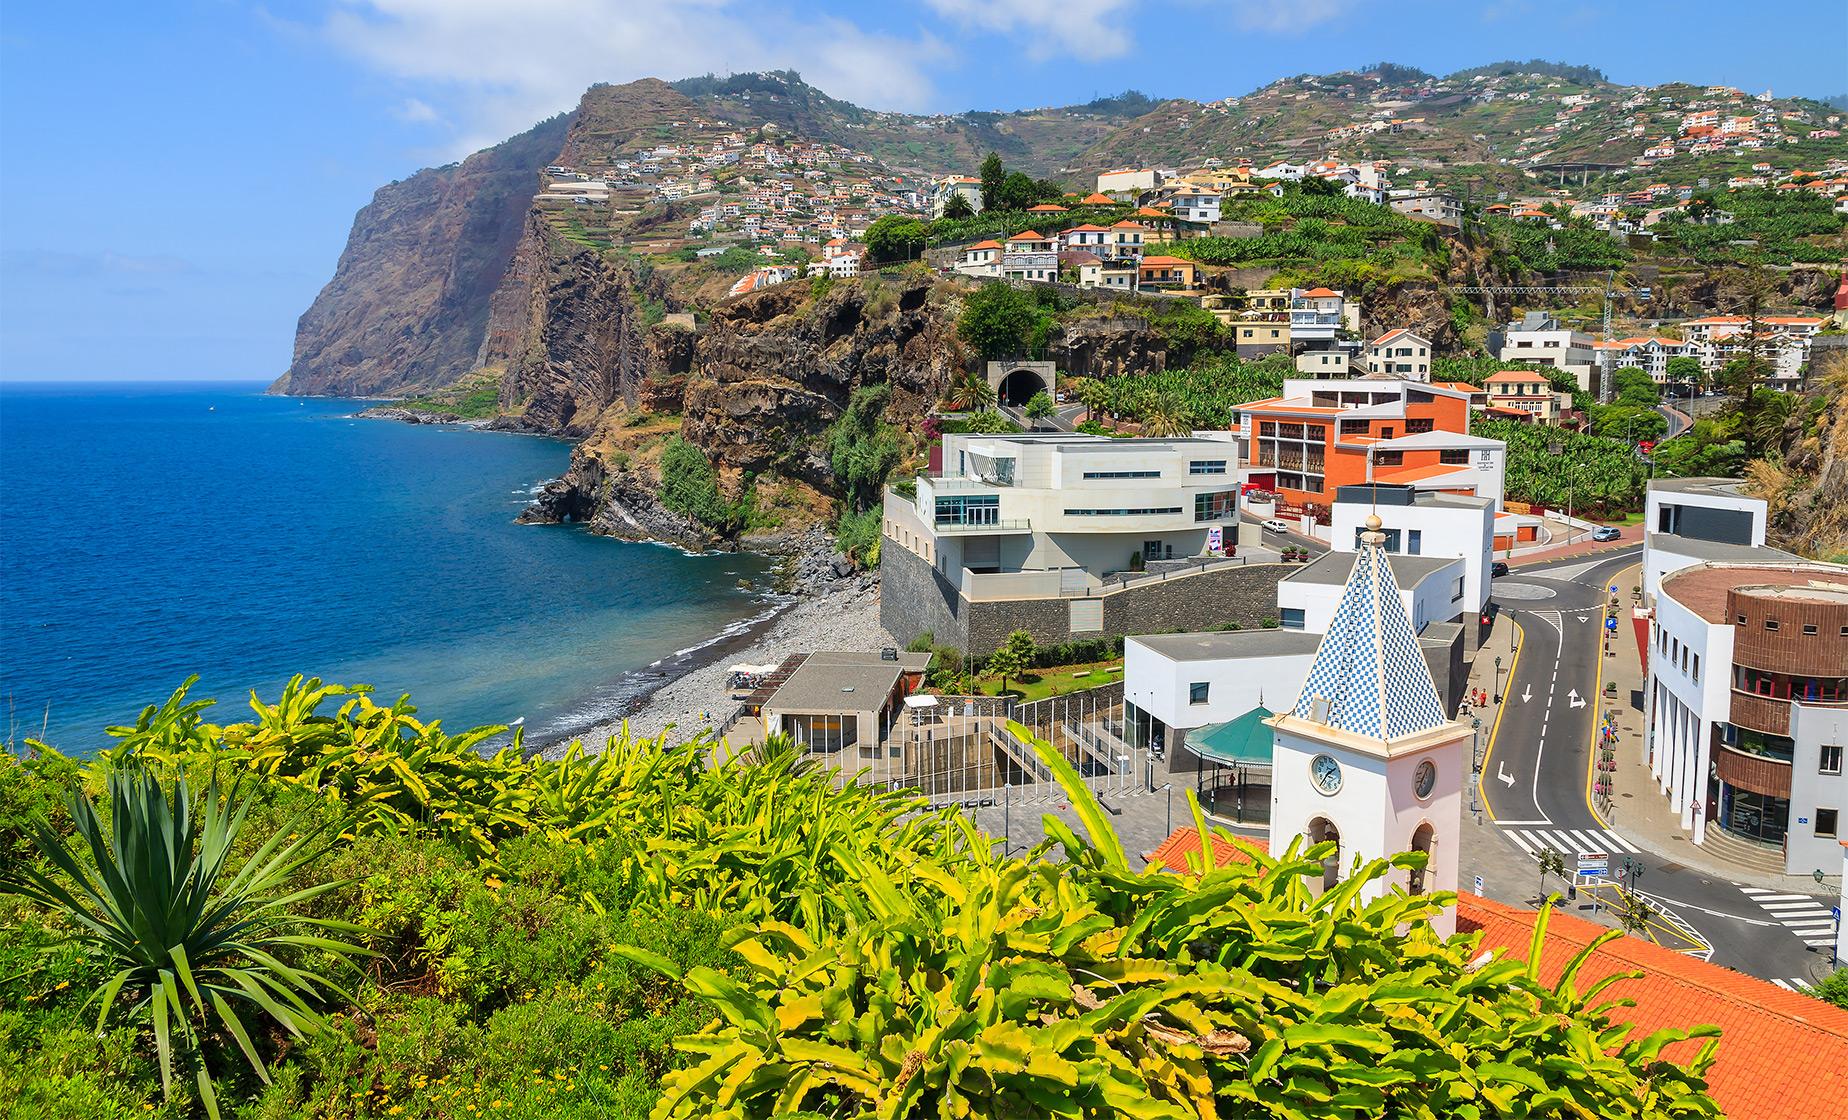 The 10 Best Madeira Funchal Portugal Shore Excursions And Trips